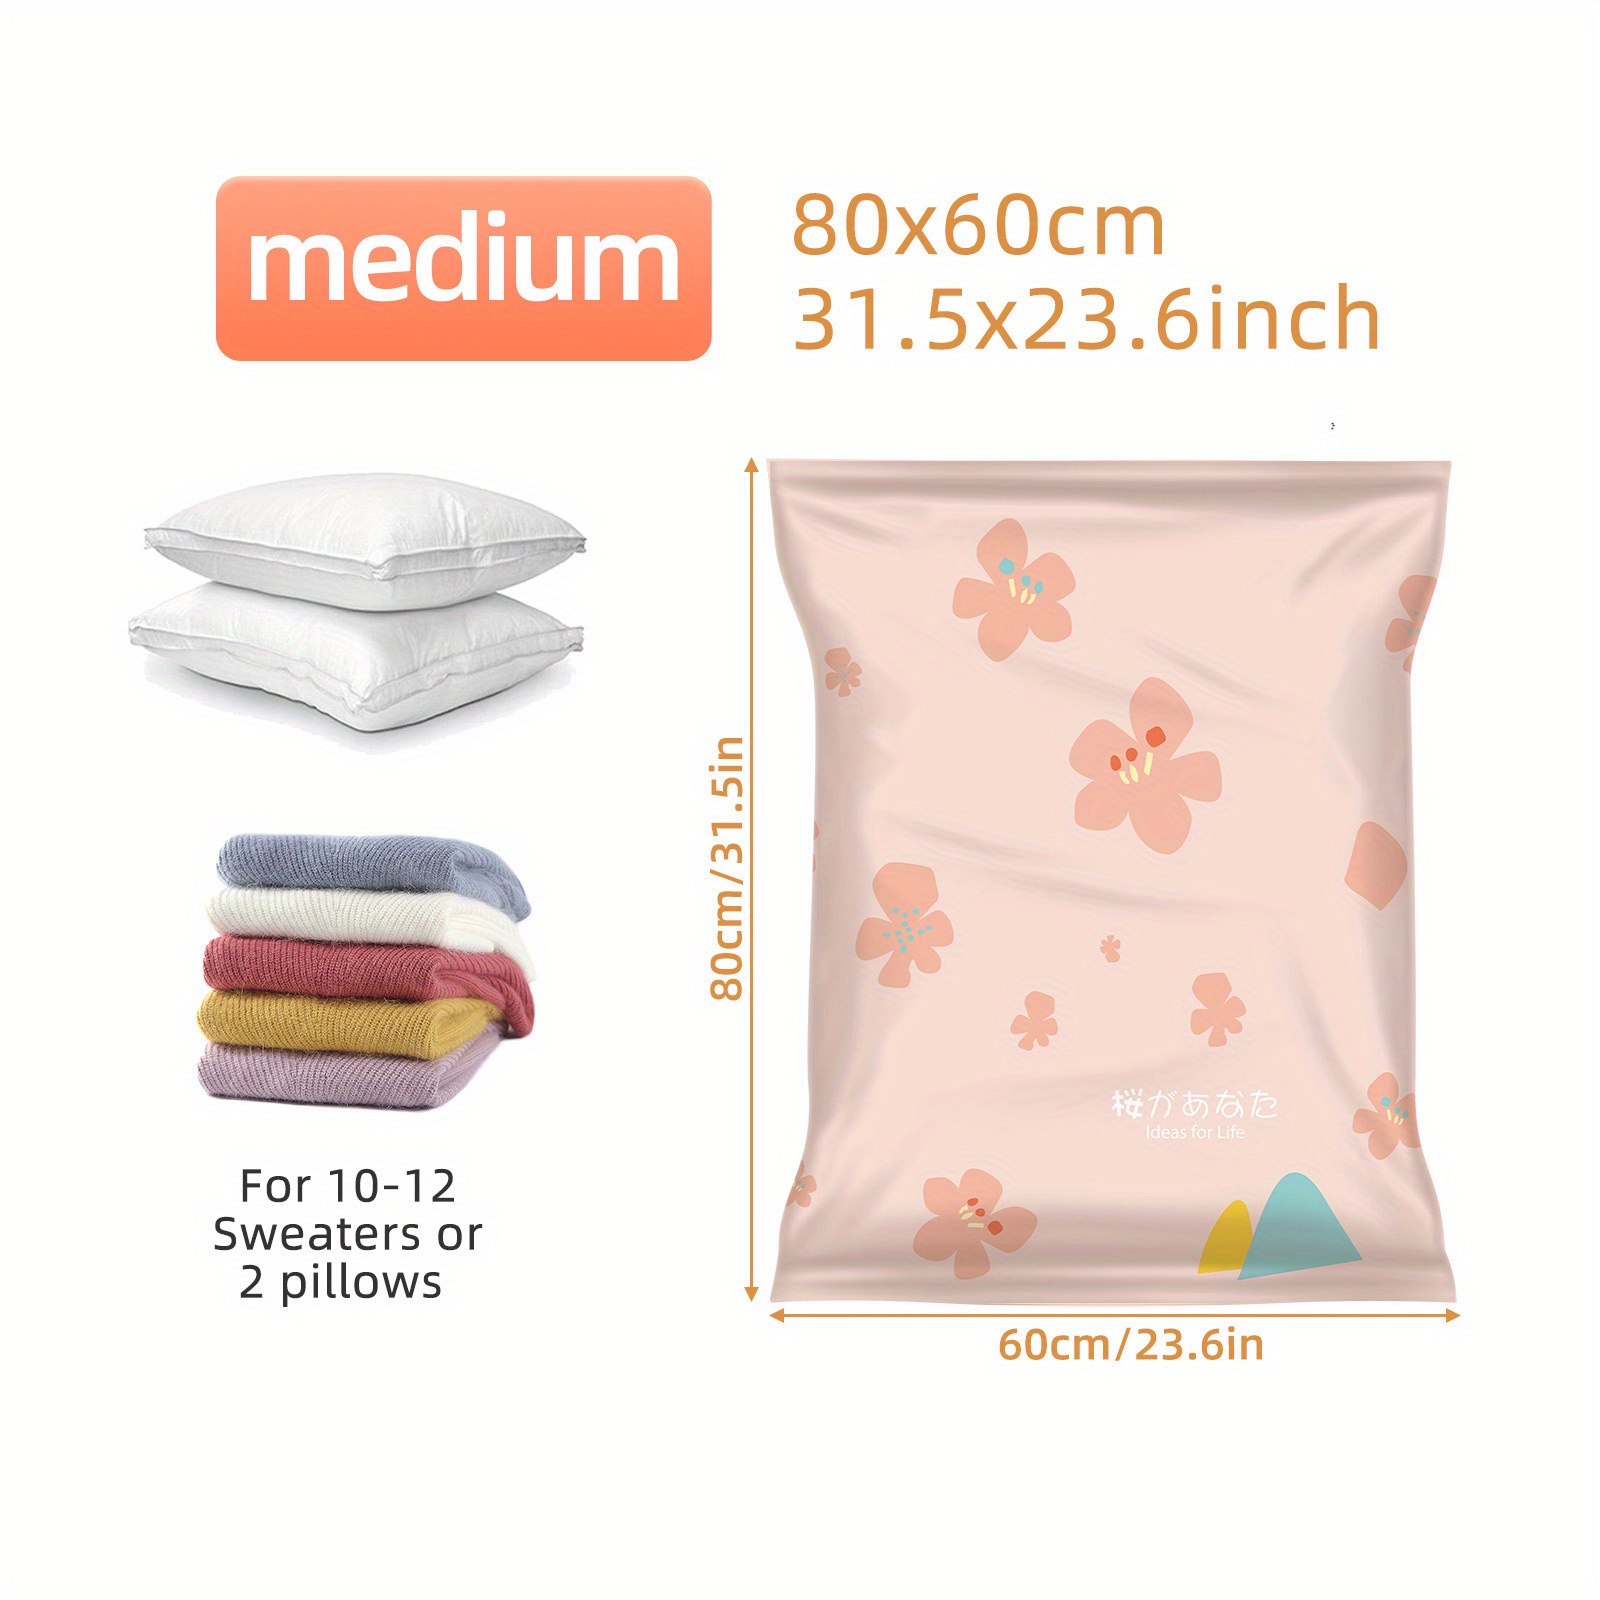 1pc White Vacuum Compression Bag For Travel, Bedding & Clothing Storage,  Quilt & Down Jacket Space Saver